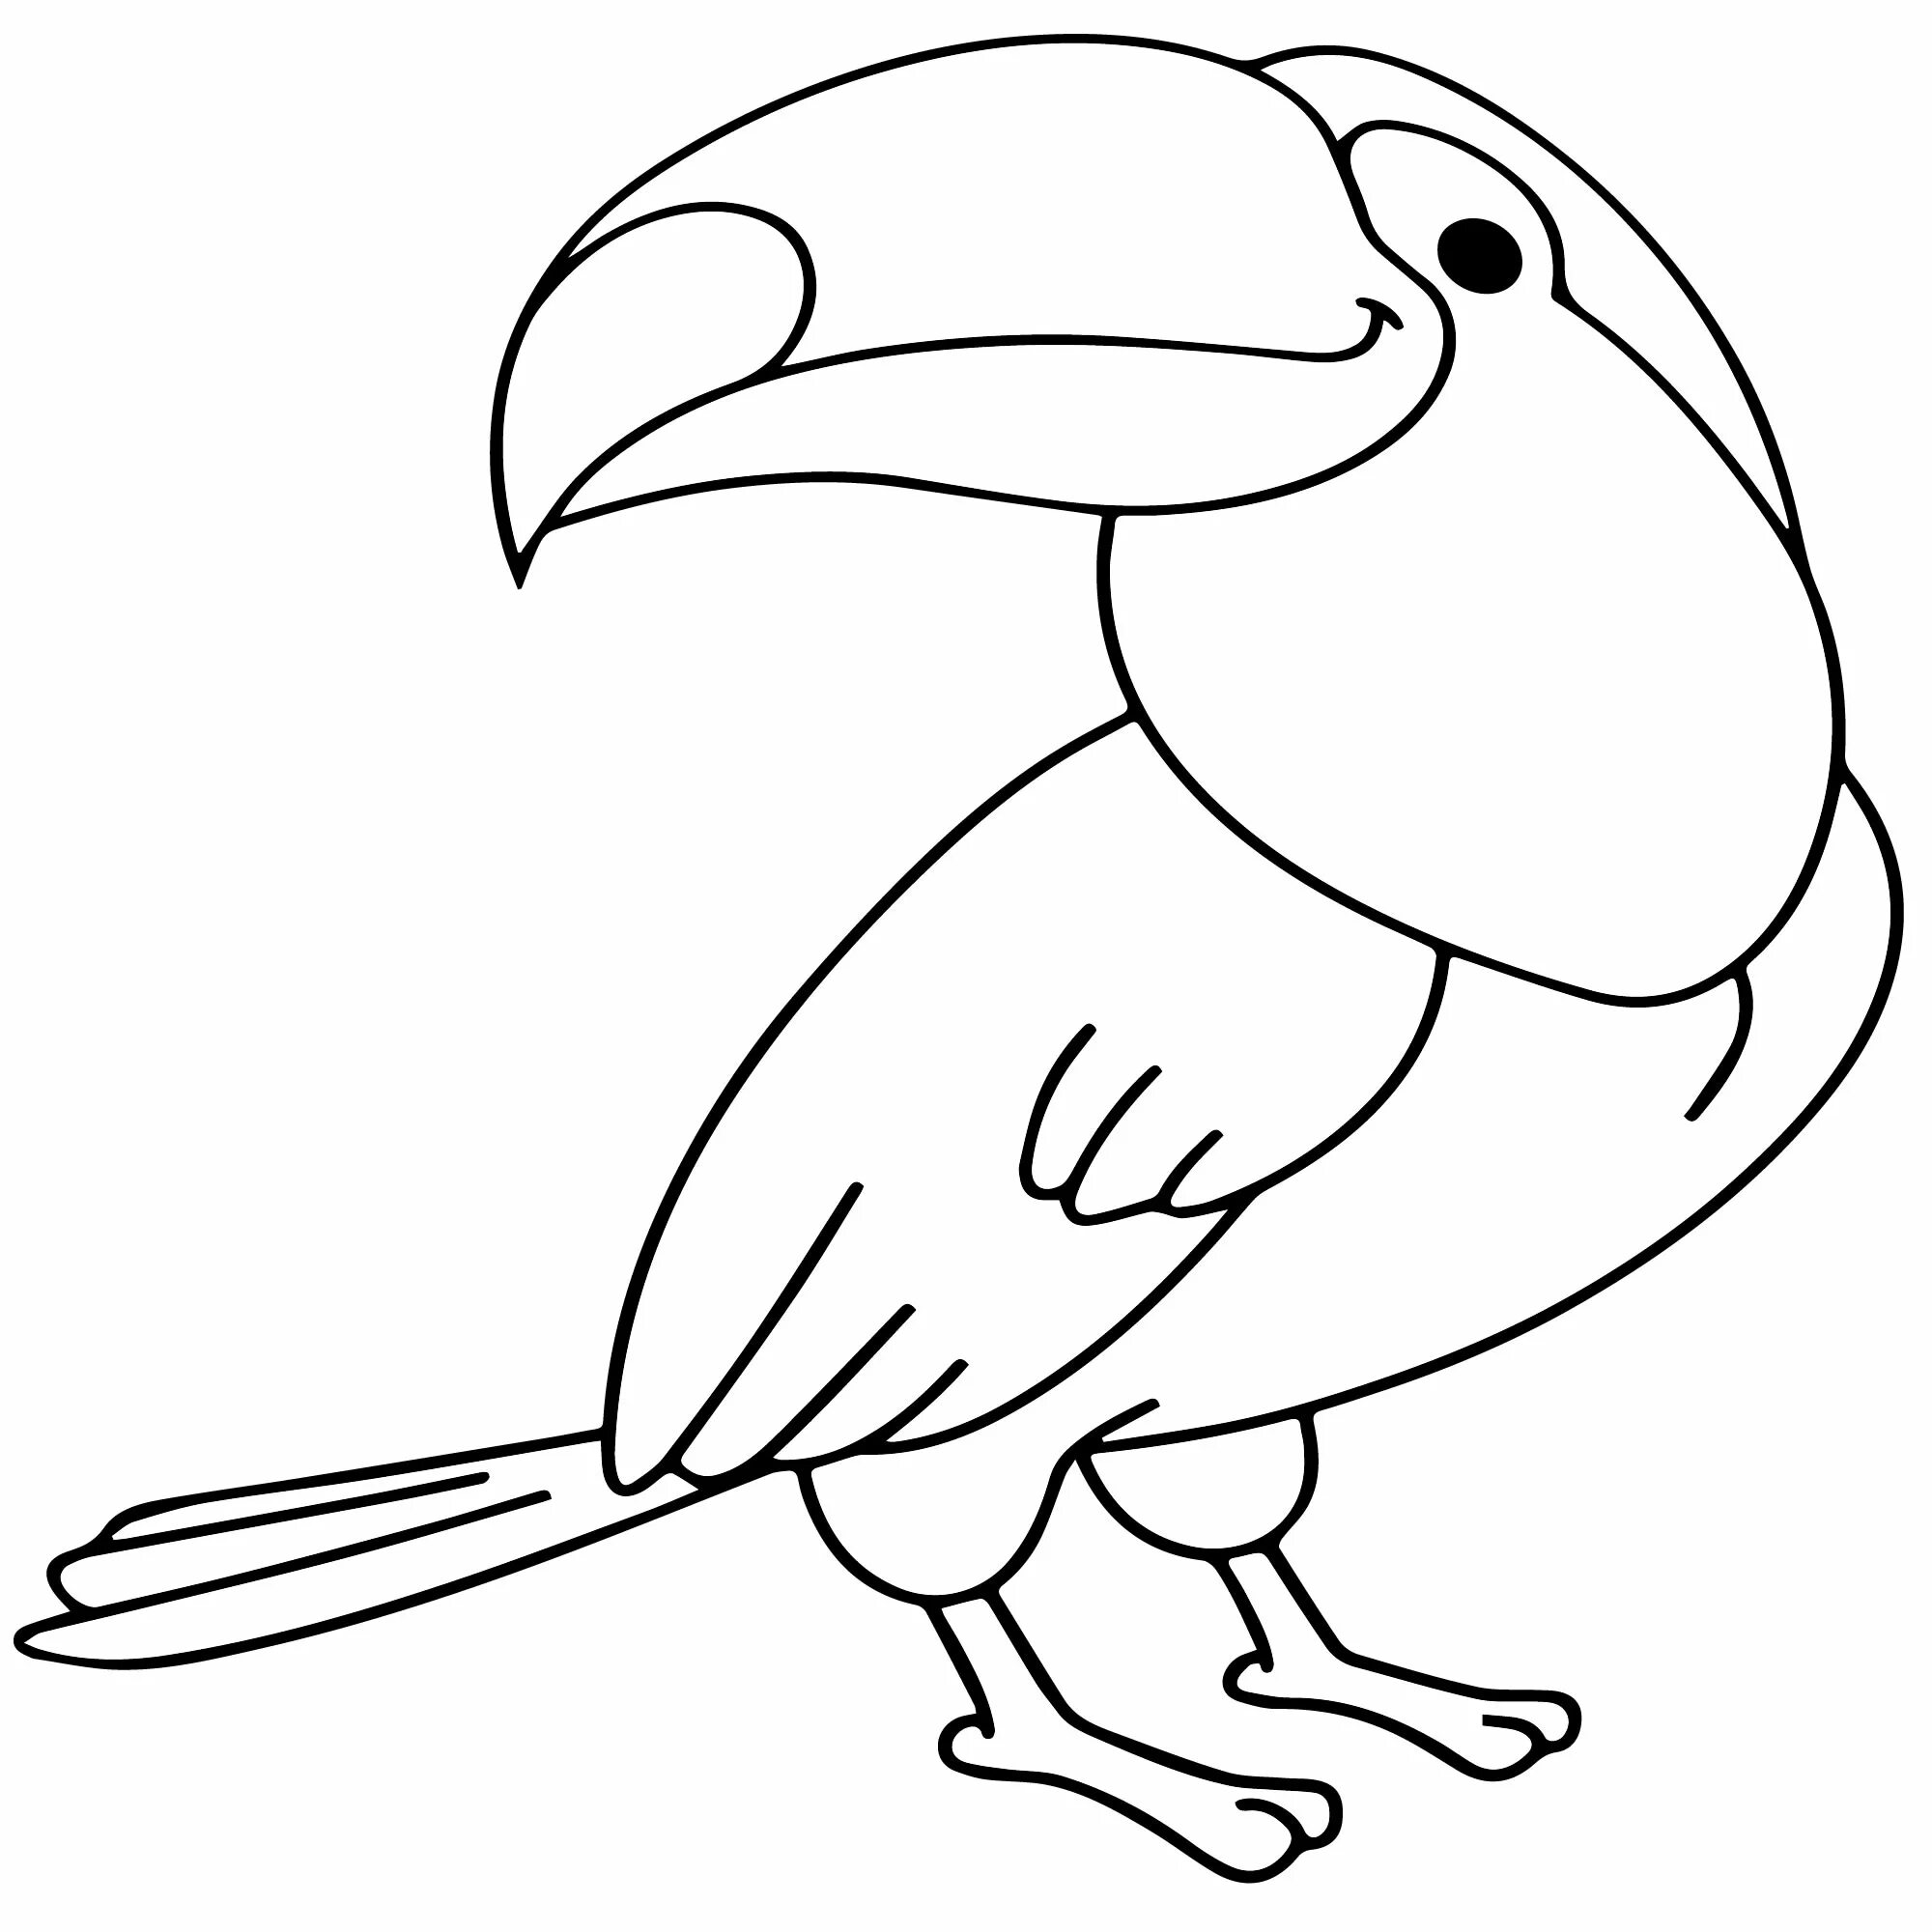 An unusual toucan coloring book for kids